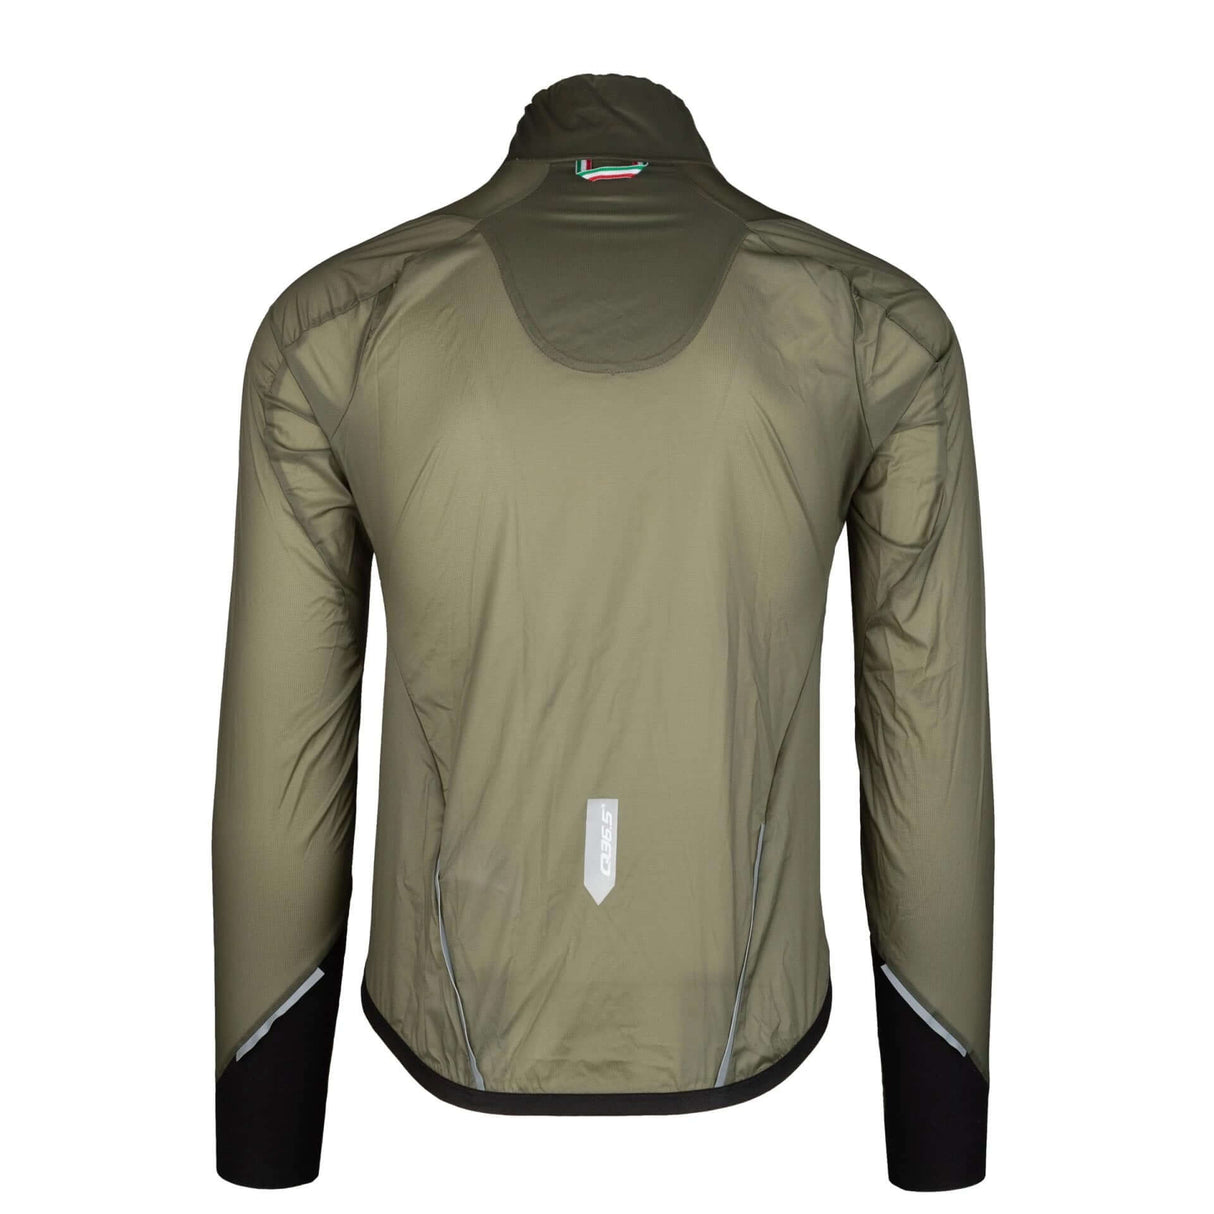 Q36.5 Air Jacket | Strictly Bicycles